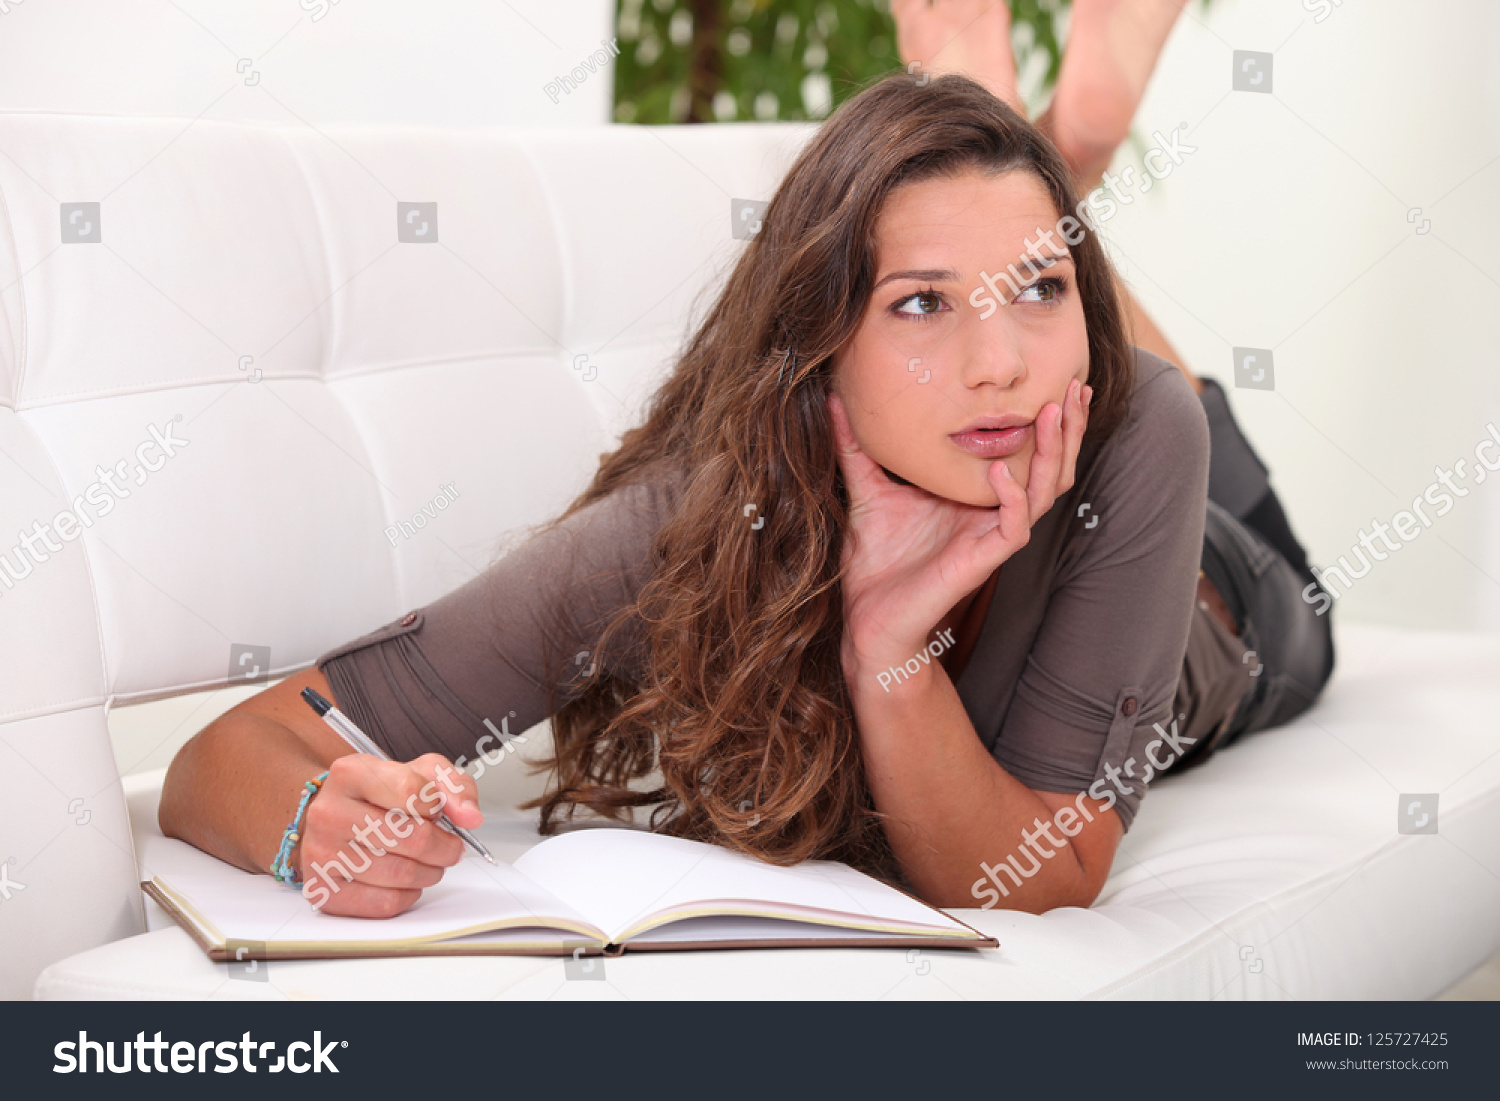 Blonde woman writing in journal - wide 6